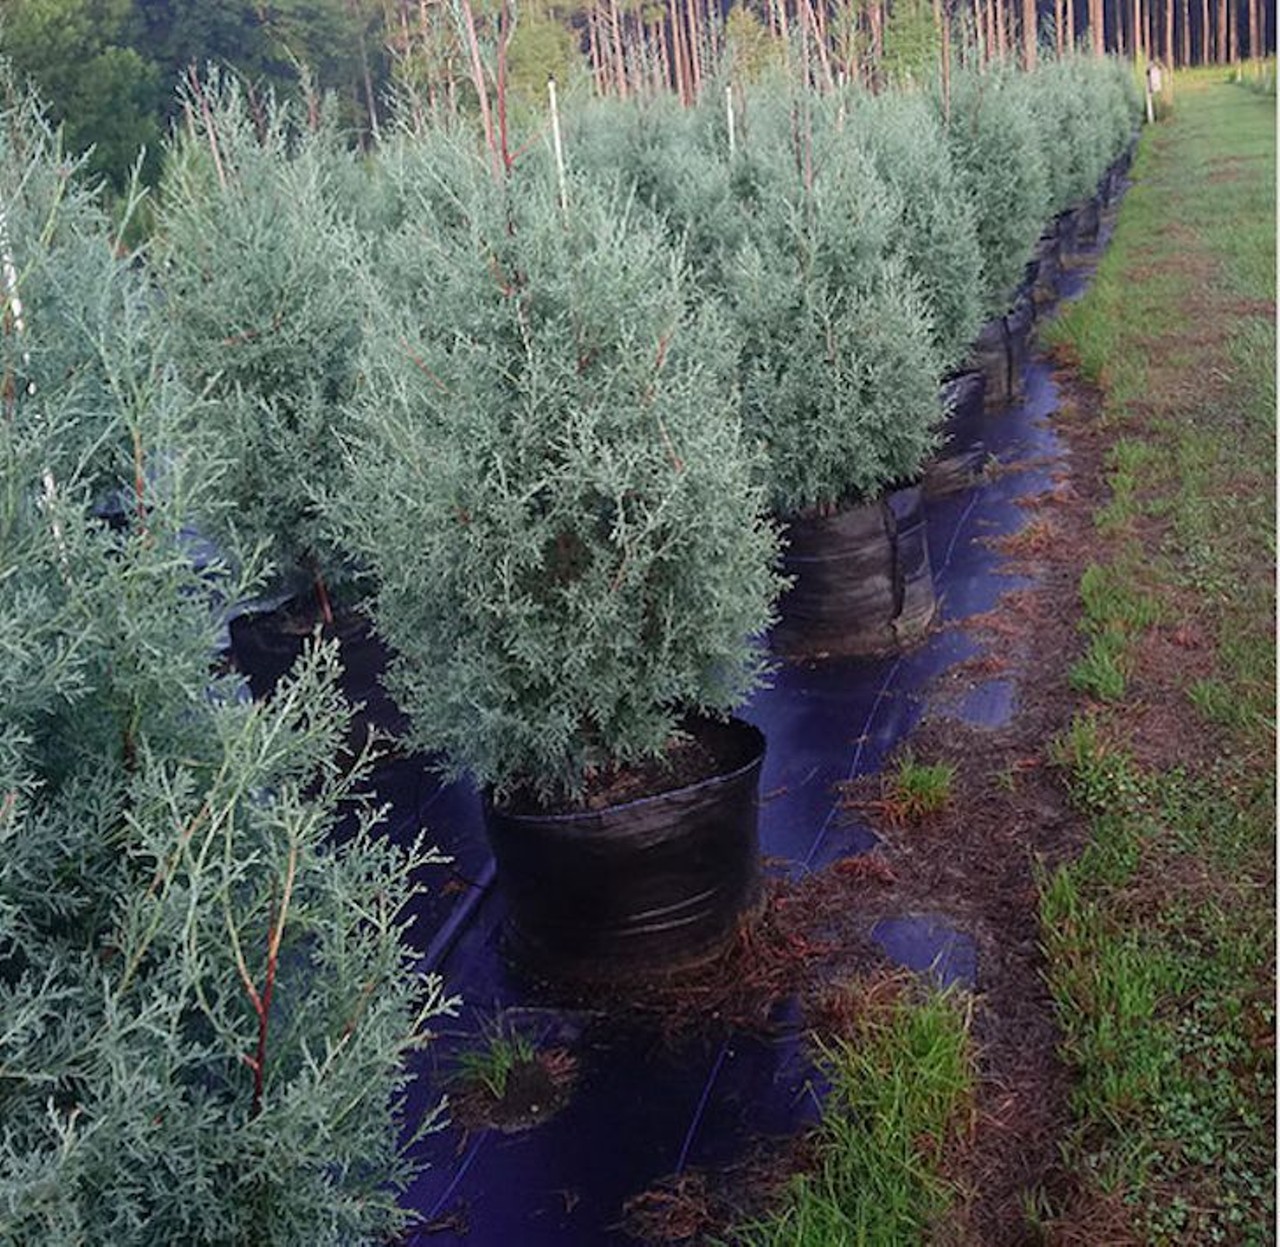 BK Cedars Christmas Tree Farm
20926 N.W. 75th St., Alachua, FL 32615, 352-373-4575
Get your live containerized tree starting Nov. 29 through Dec. 22 on weekends from 10 a.m. to 6 p.m. This farm is where the state&#146;s official living Christmas tree is from and one is planted at the Florida State Capitol. So if you&#146;re looking for a tree worth bragging about, there&#146;s that.
Photo via BK Cedars/Website